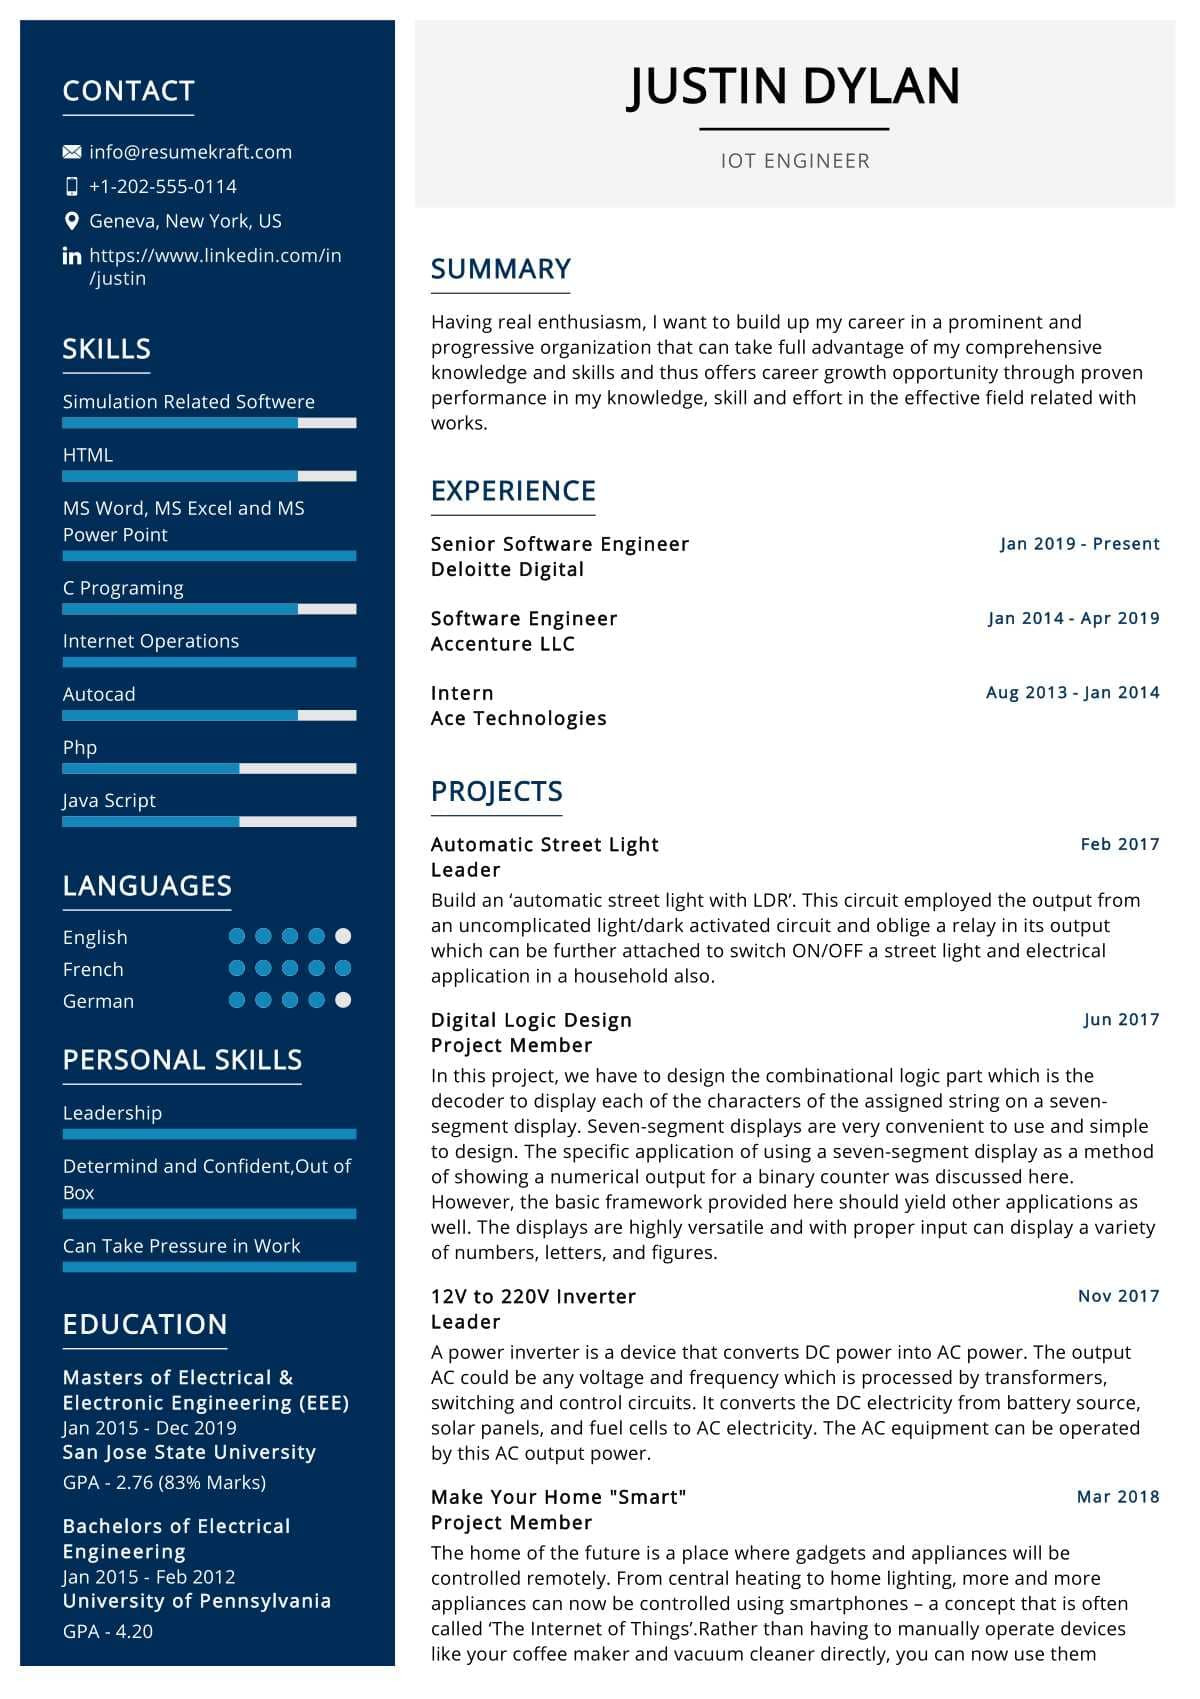 Research and Development Engineer Resume Sample Iot Engineer Resume Sample 2022 Writing Tips – Resumekraft